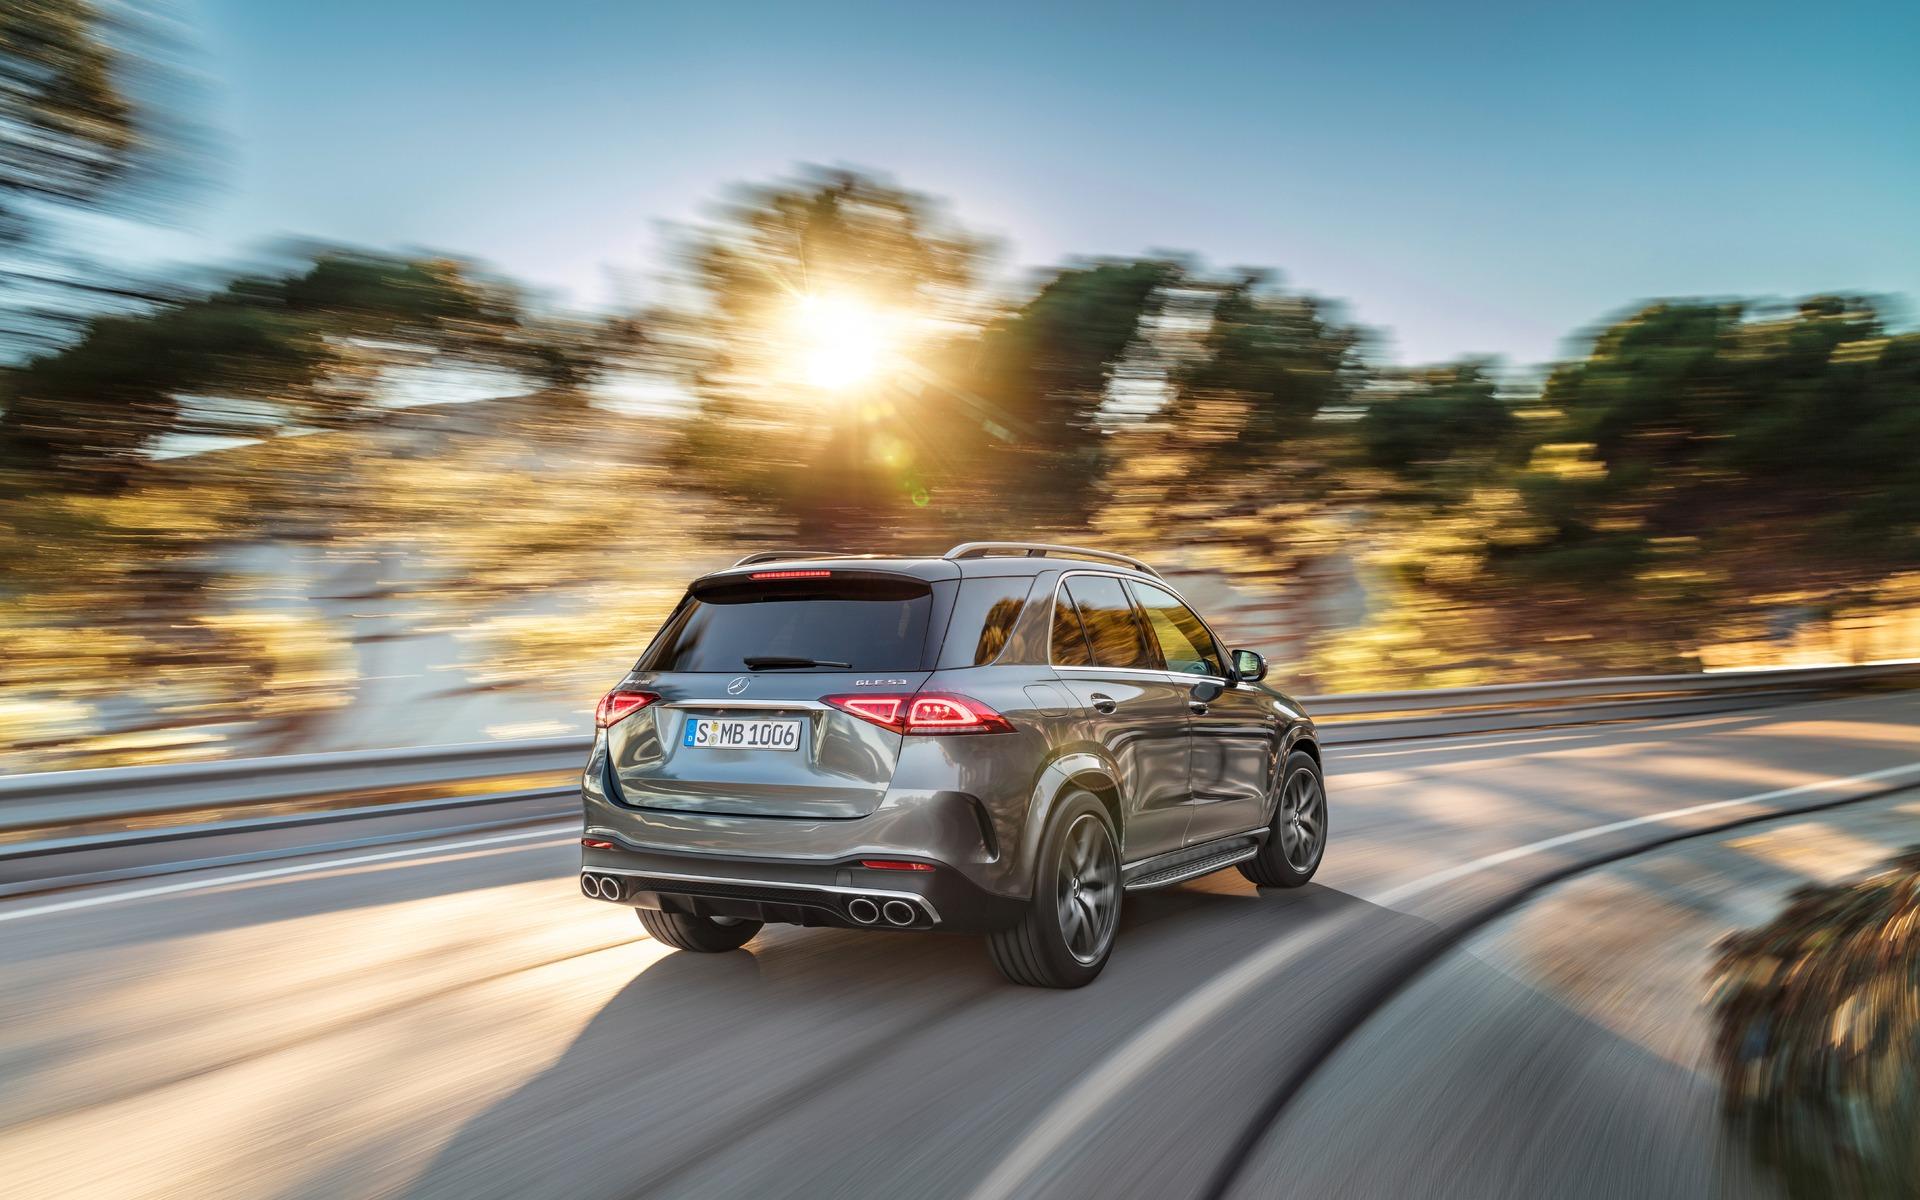 The 2020 Mercedes AMG GLE 53 4MATIC+ Appears